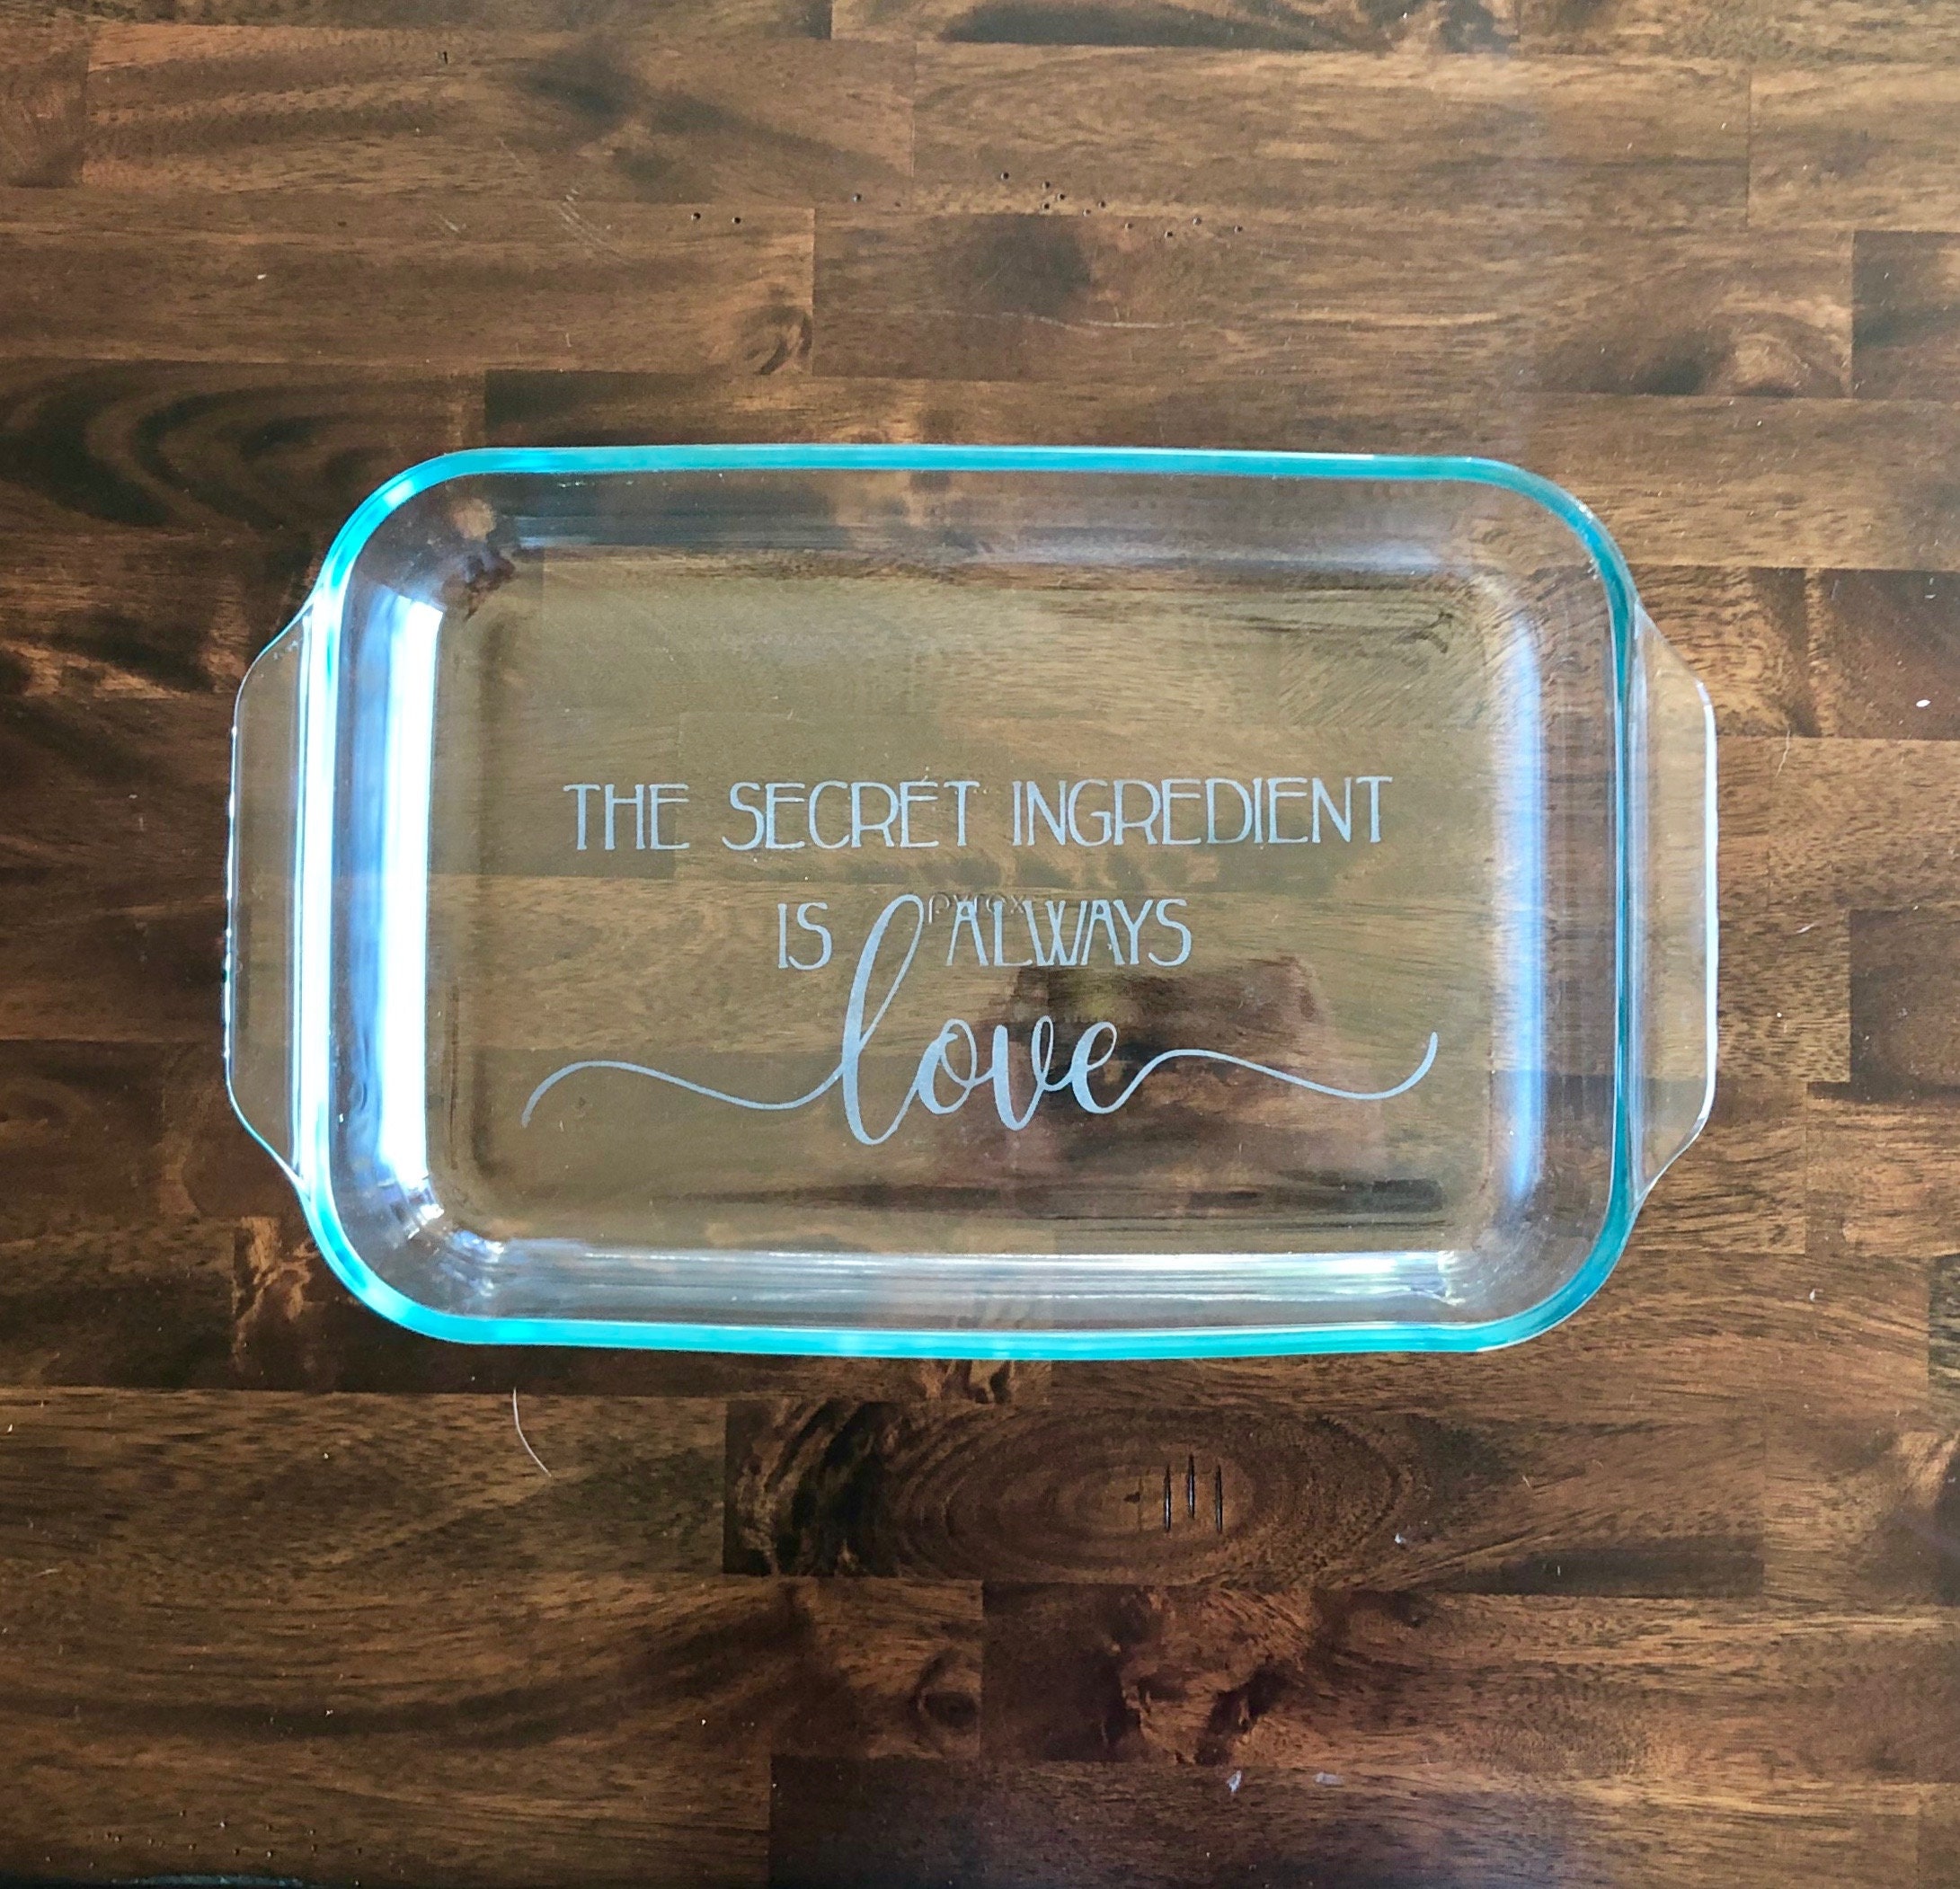 The Art of the Etched Casserole Dish: Your Questions Answered